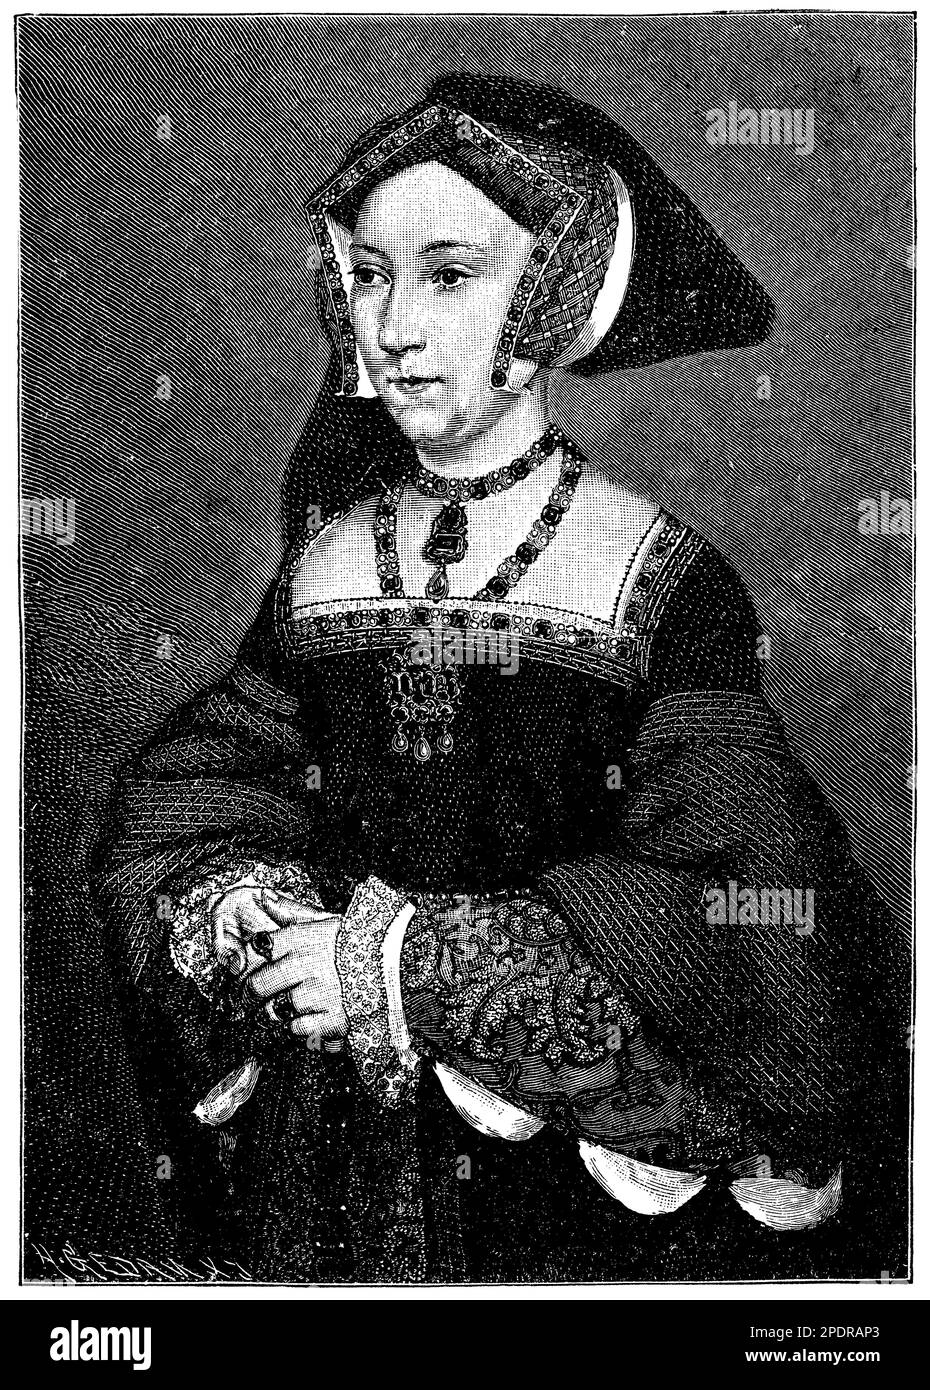 Joan Seymour (c. 1508-1537) was the third wife of King Henry VIII of England and the mother of King Edward VI. Joan was known for her quiet and gentle demeanor, and was a favorite of Henry's after the tumultuous relationship with his previous wife, Anne Boleyn. Joan gave birth to a son, securing her position as queen, but she died shortly after from complications related to childbirth. Despite her brief reign and lack of historical documentation, Joan remains a notable figure in Tudor history. Stock Photo